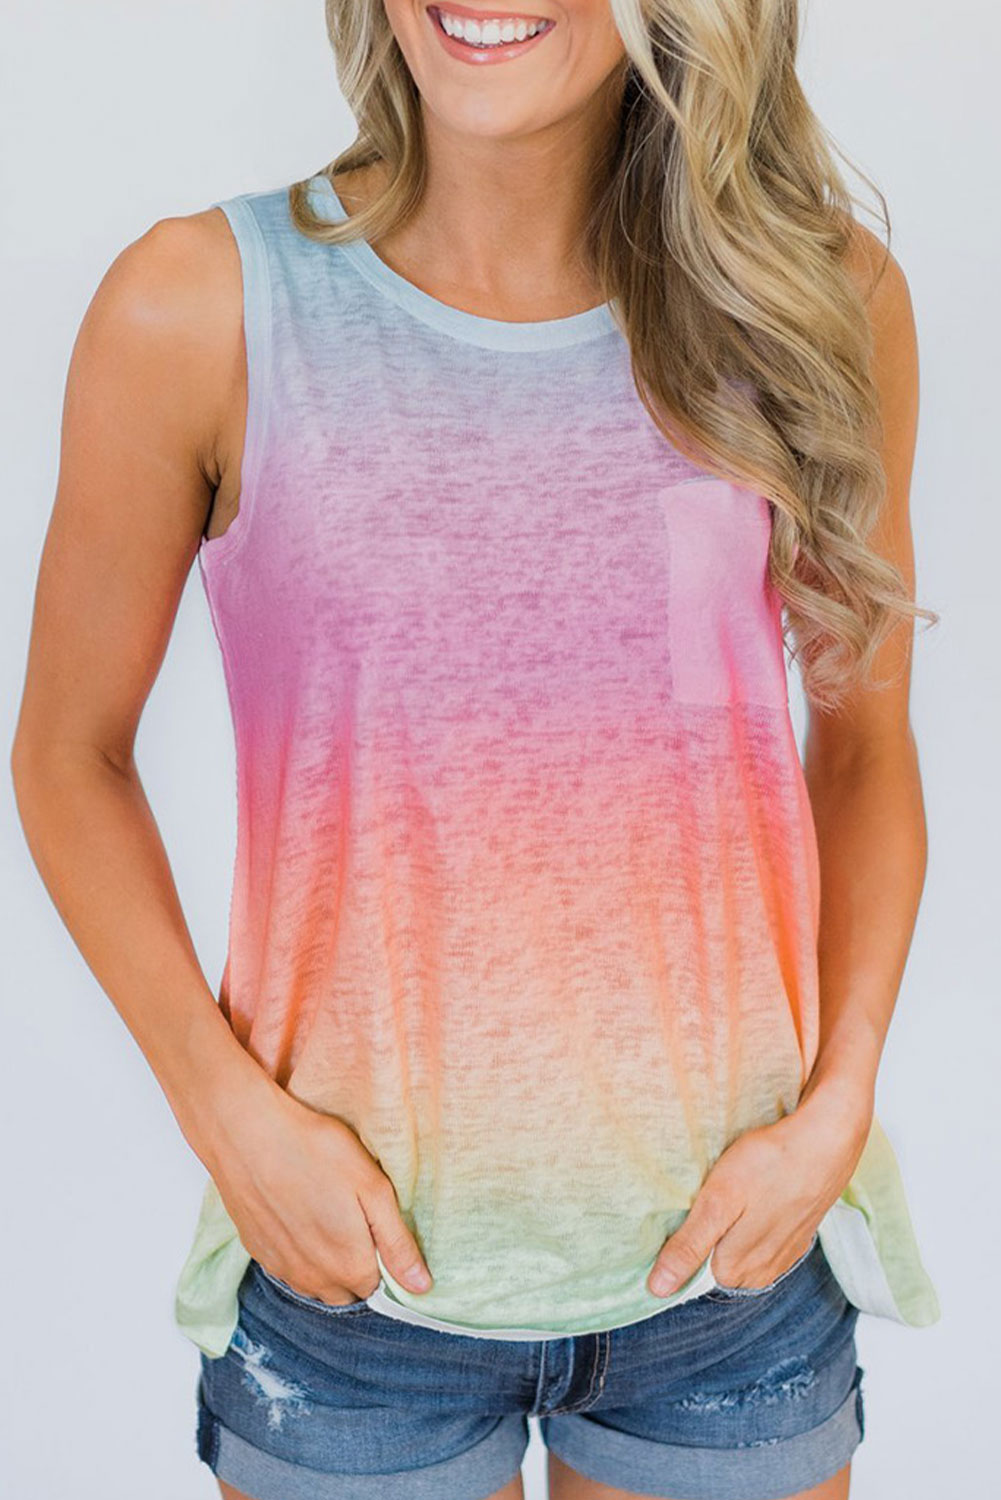 Shewin Wholesale Casual Pink & Blue TIE DYE Front Pocket Sleeveless Tank Top